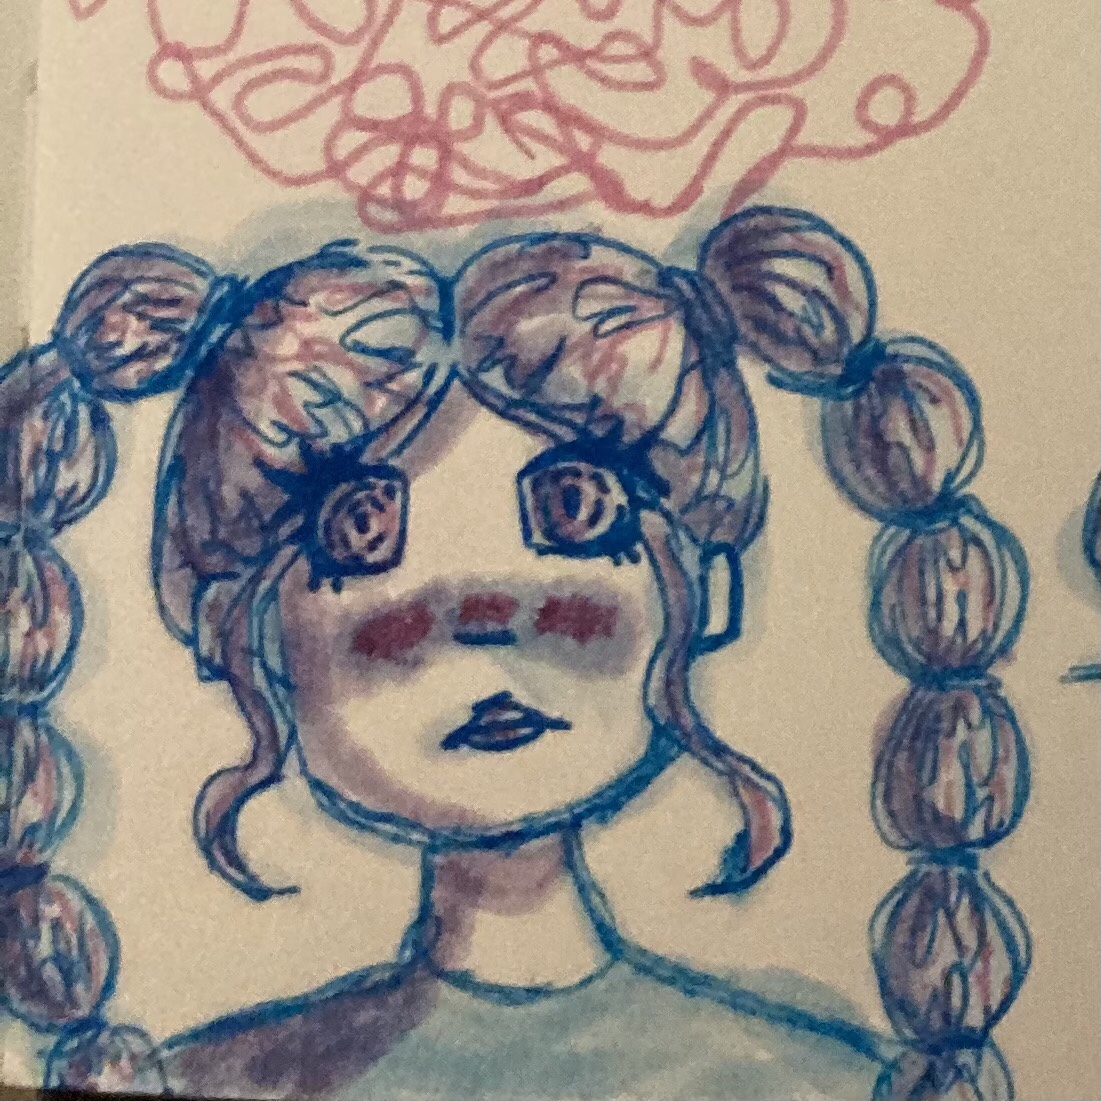 drawing of a girl with bubble braids made with blue and purple marker